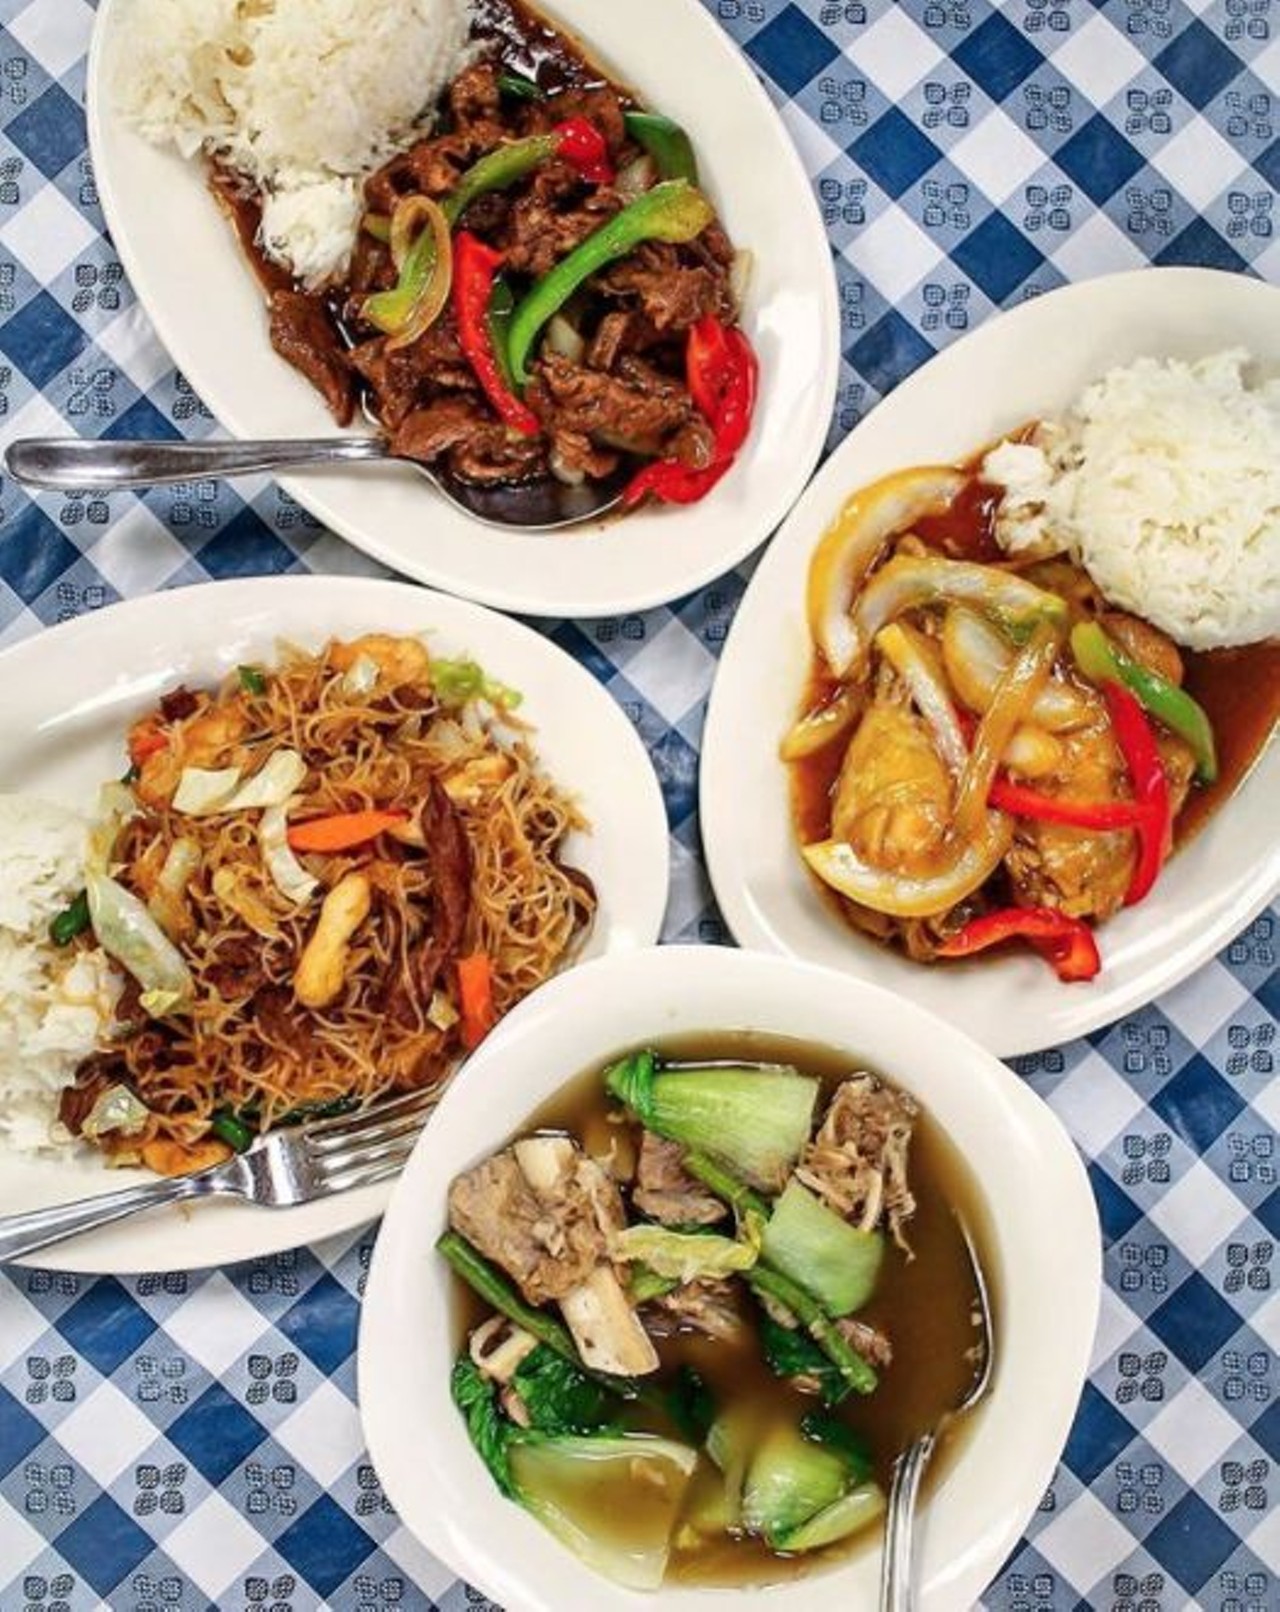 Susie&#146;s Lumpia House
8923 Culebra Road, Suite 106, (210) 616-4354
This buffet-style restaurant in the city&#146;s far west side offers freshness and a rotating list of dishes. Stop in for lunch for under $12. 
Photo via Instagram,  s.a.foodie